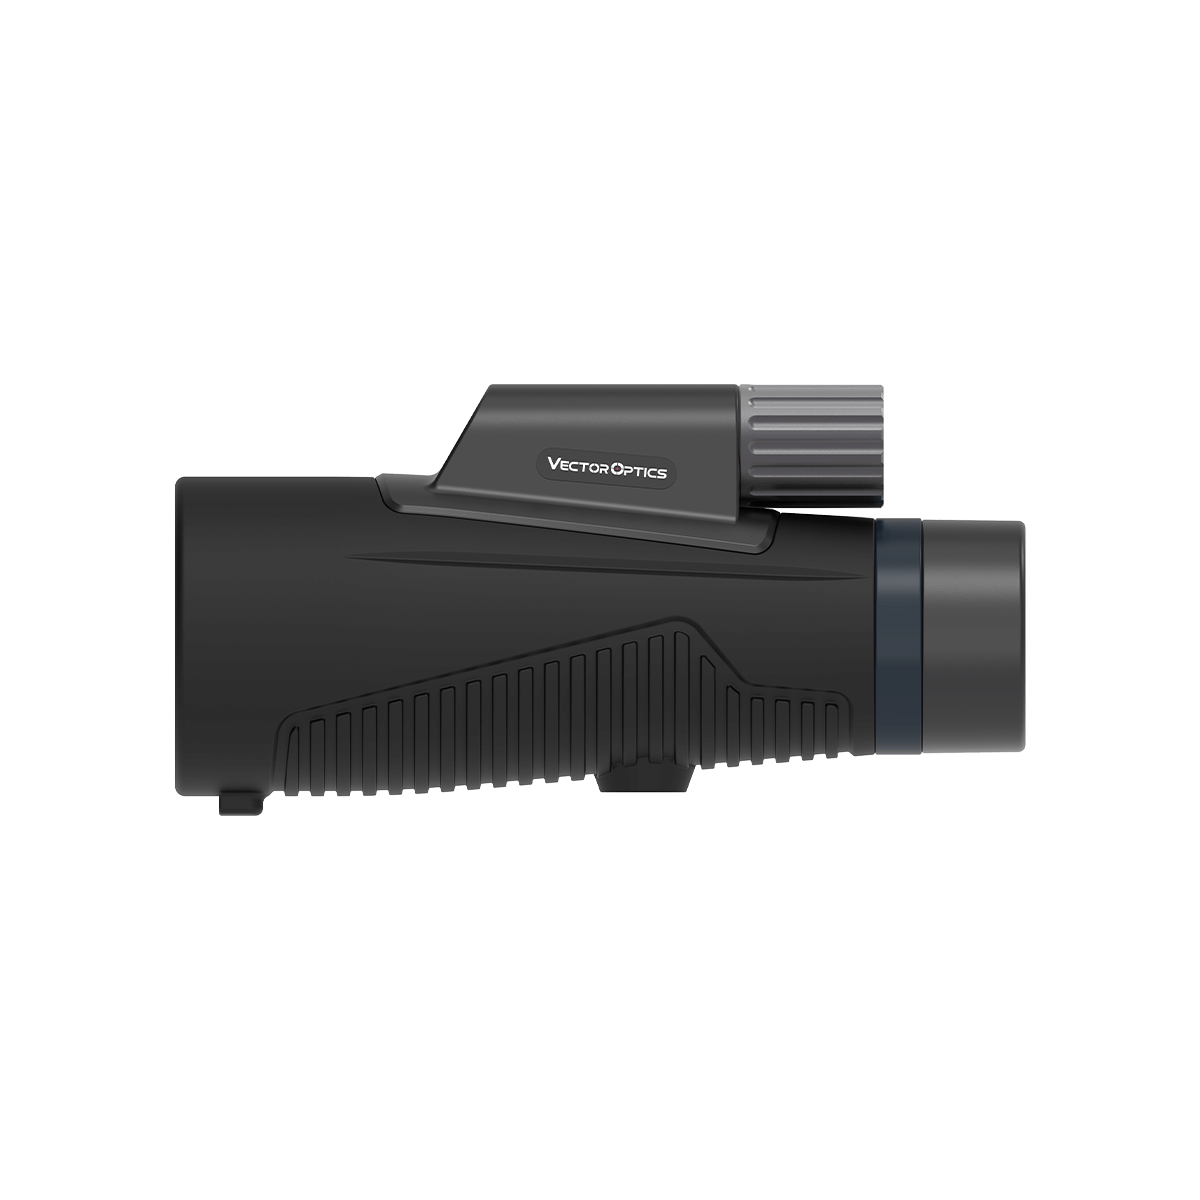 Forester 10x50 ED Monocular